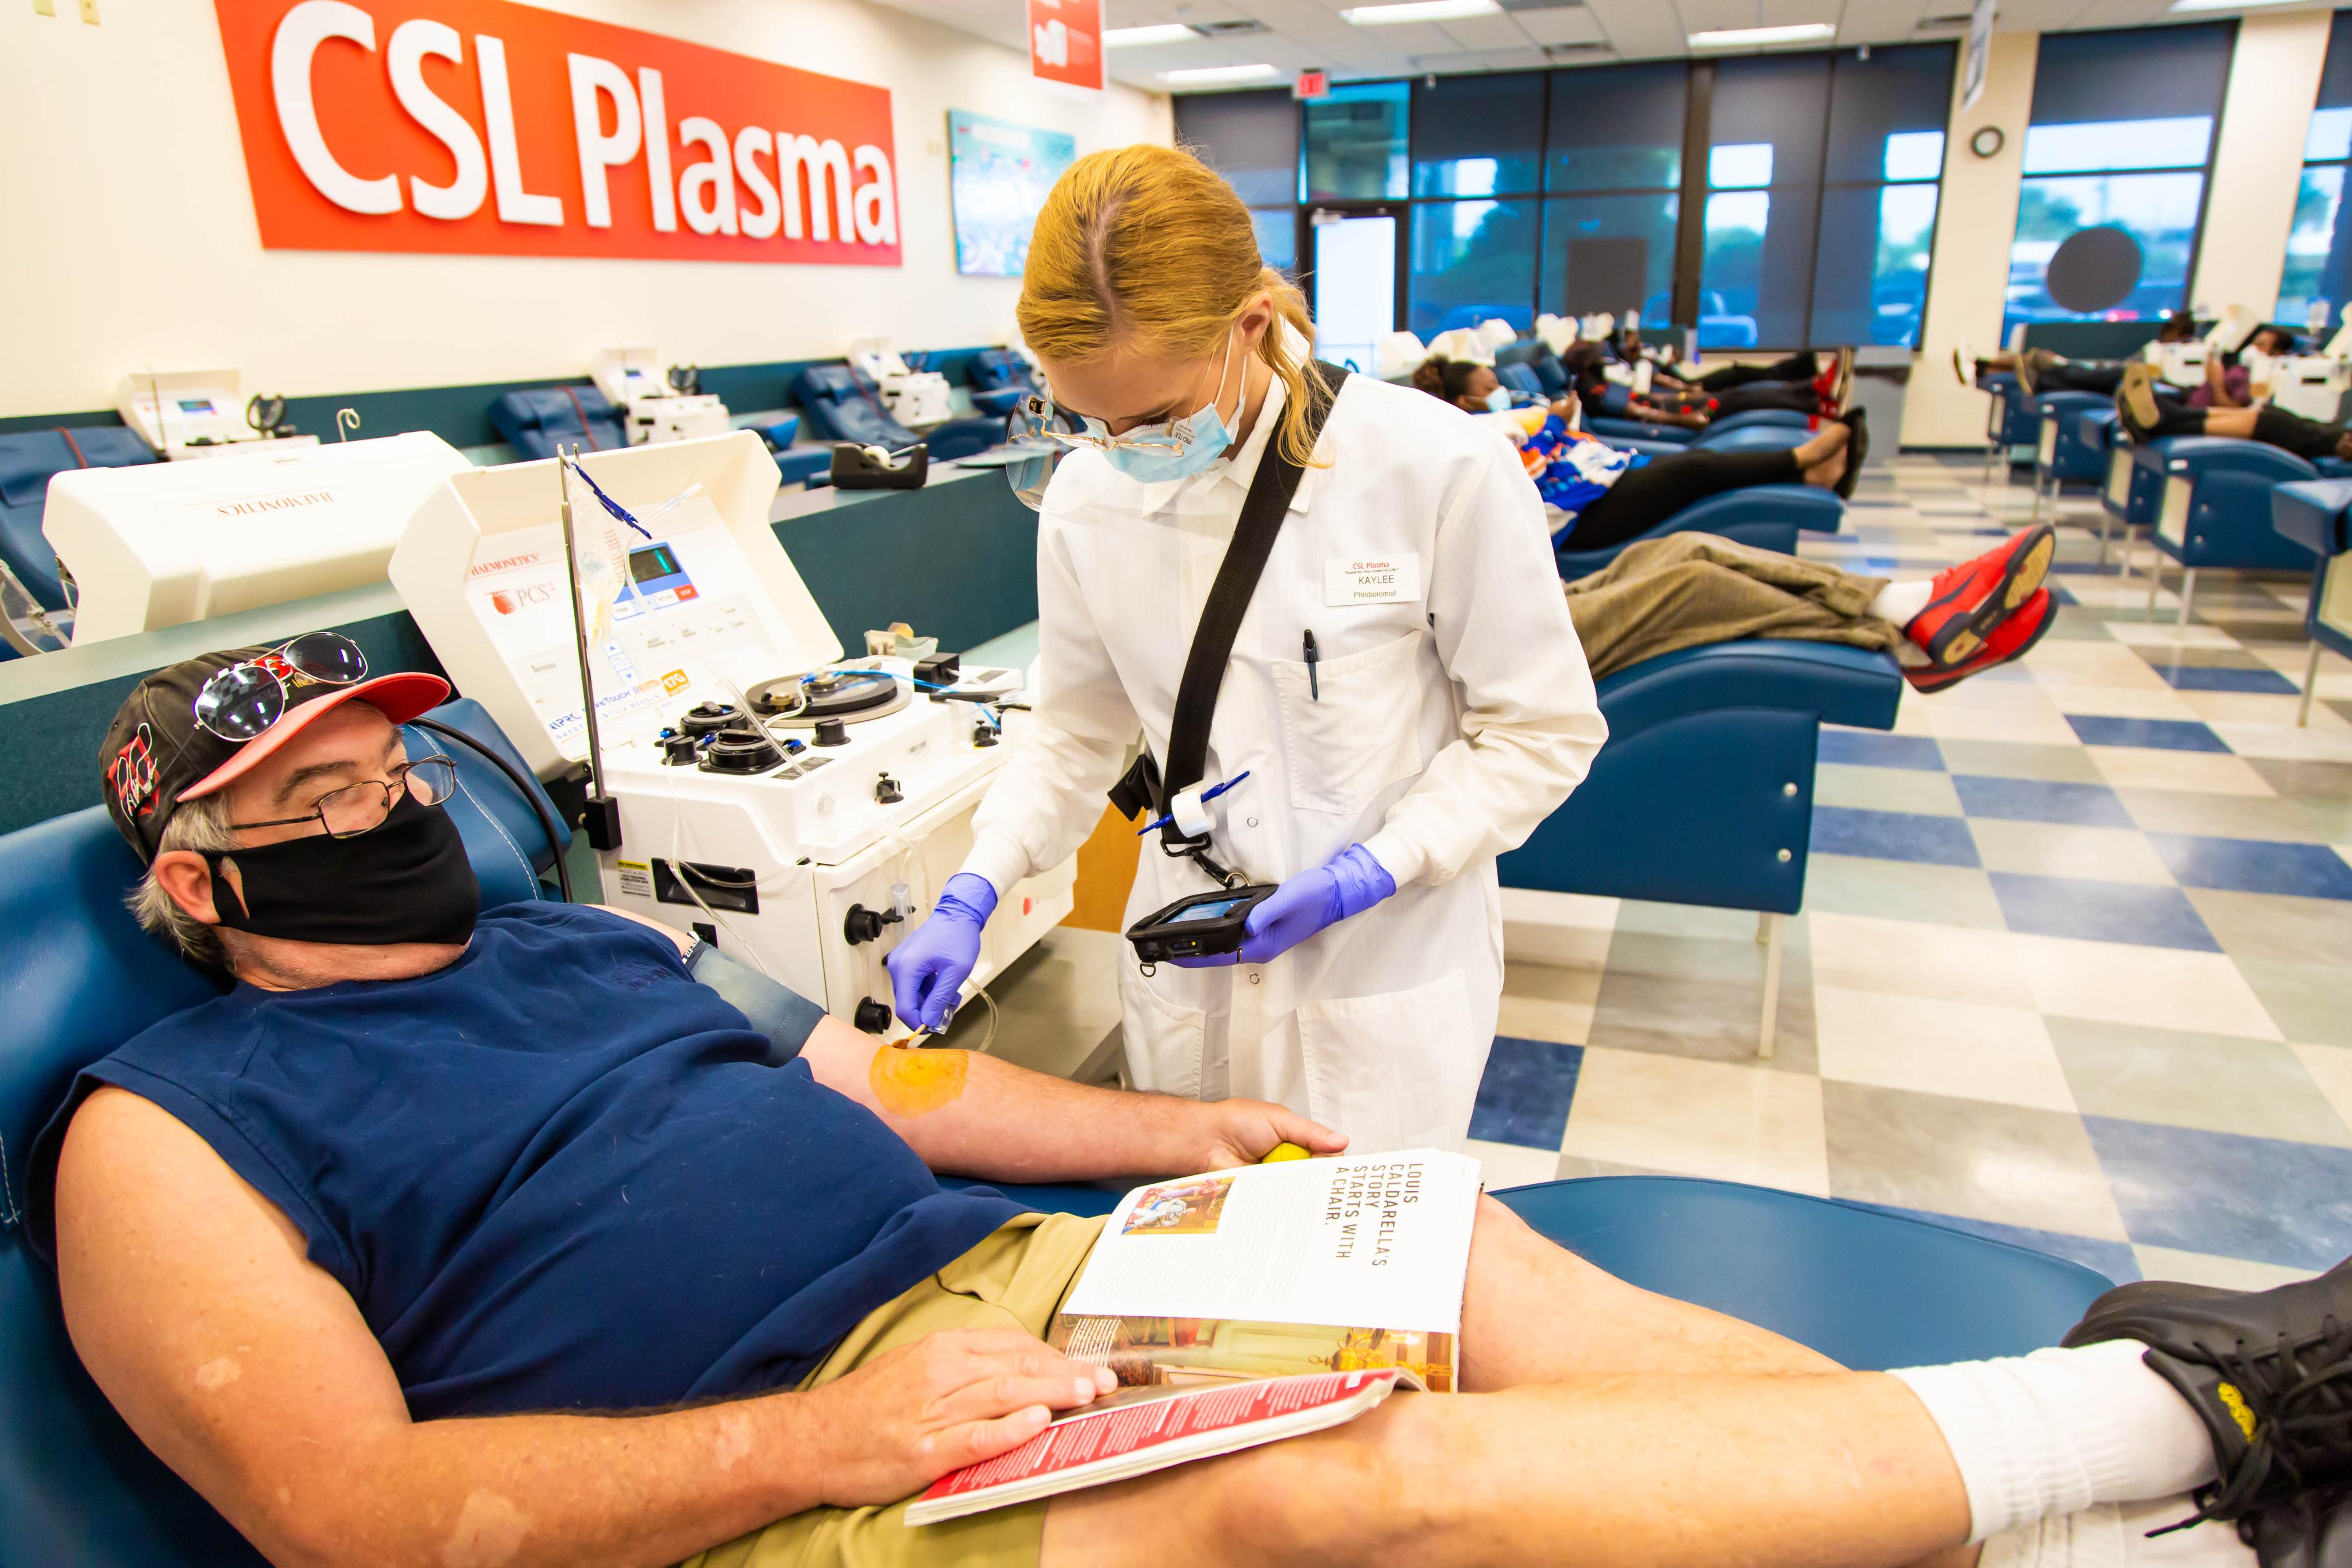 Female CSL Plasma personnel attends to a male middle-aged plasma donor